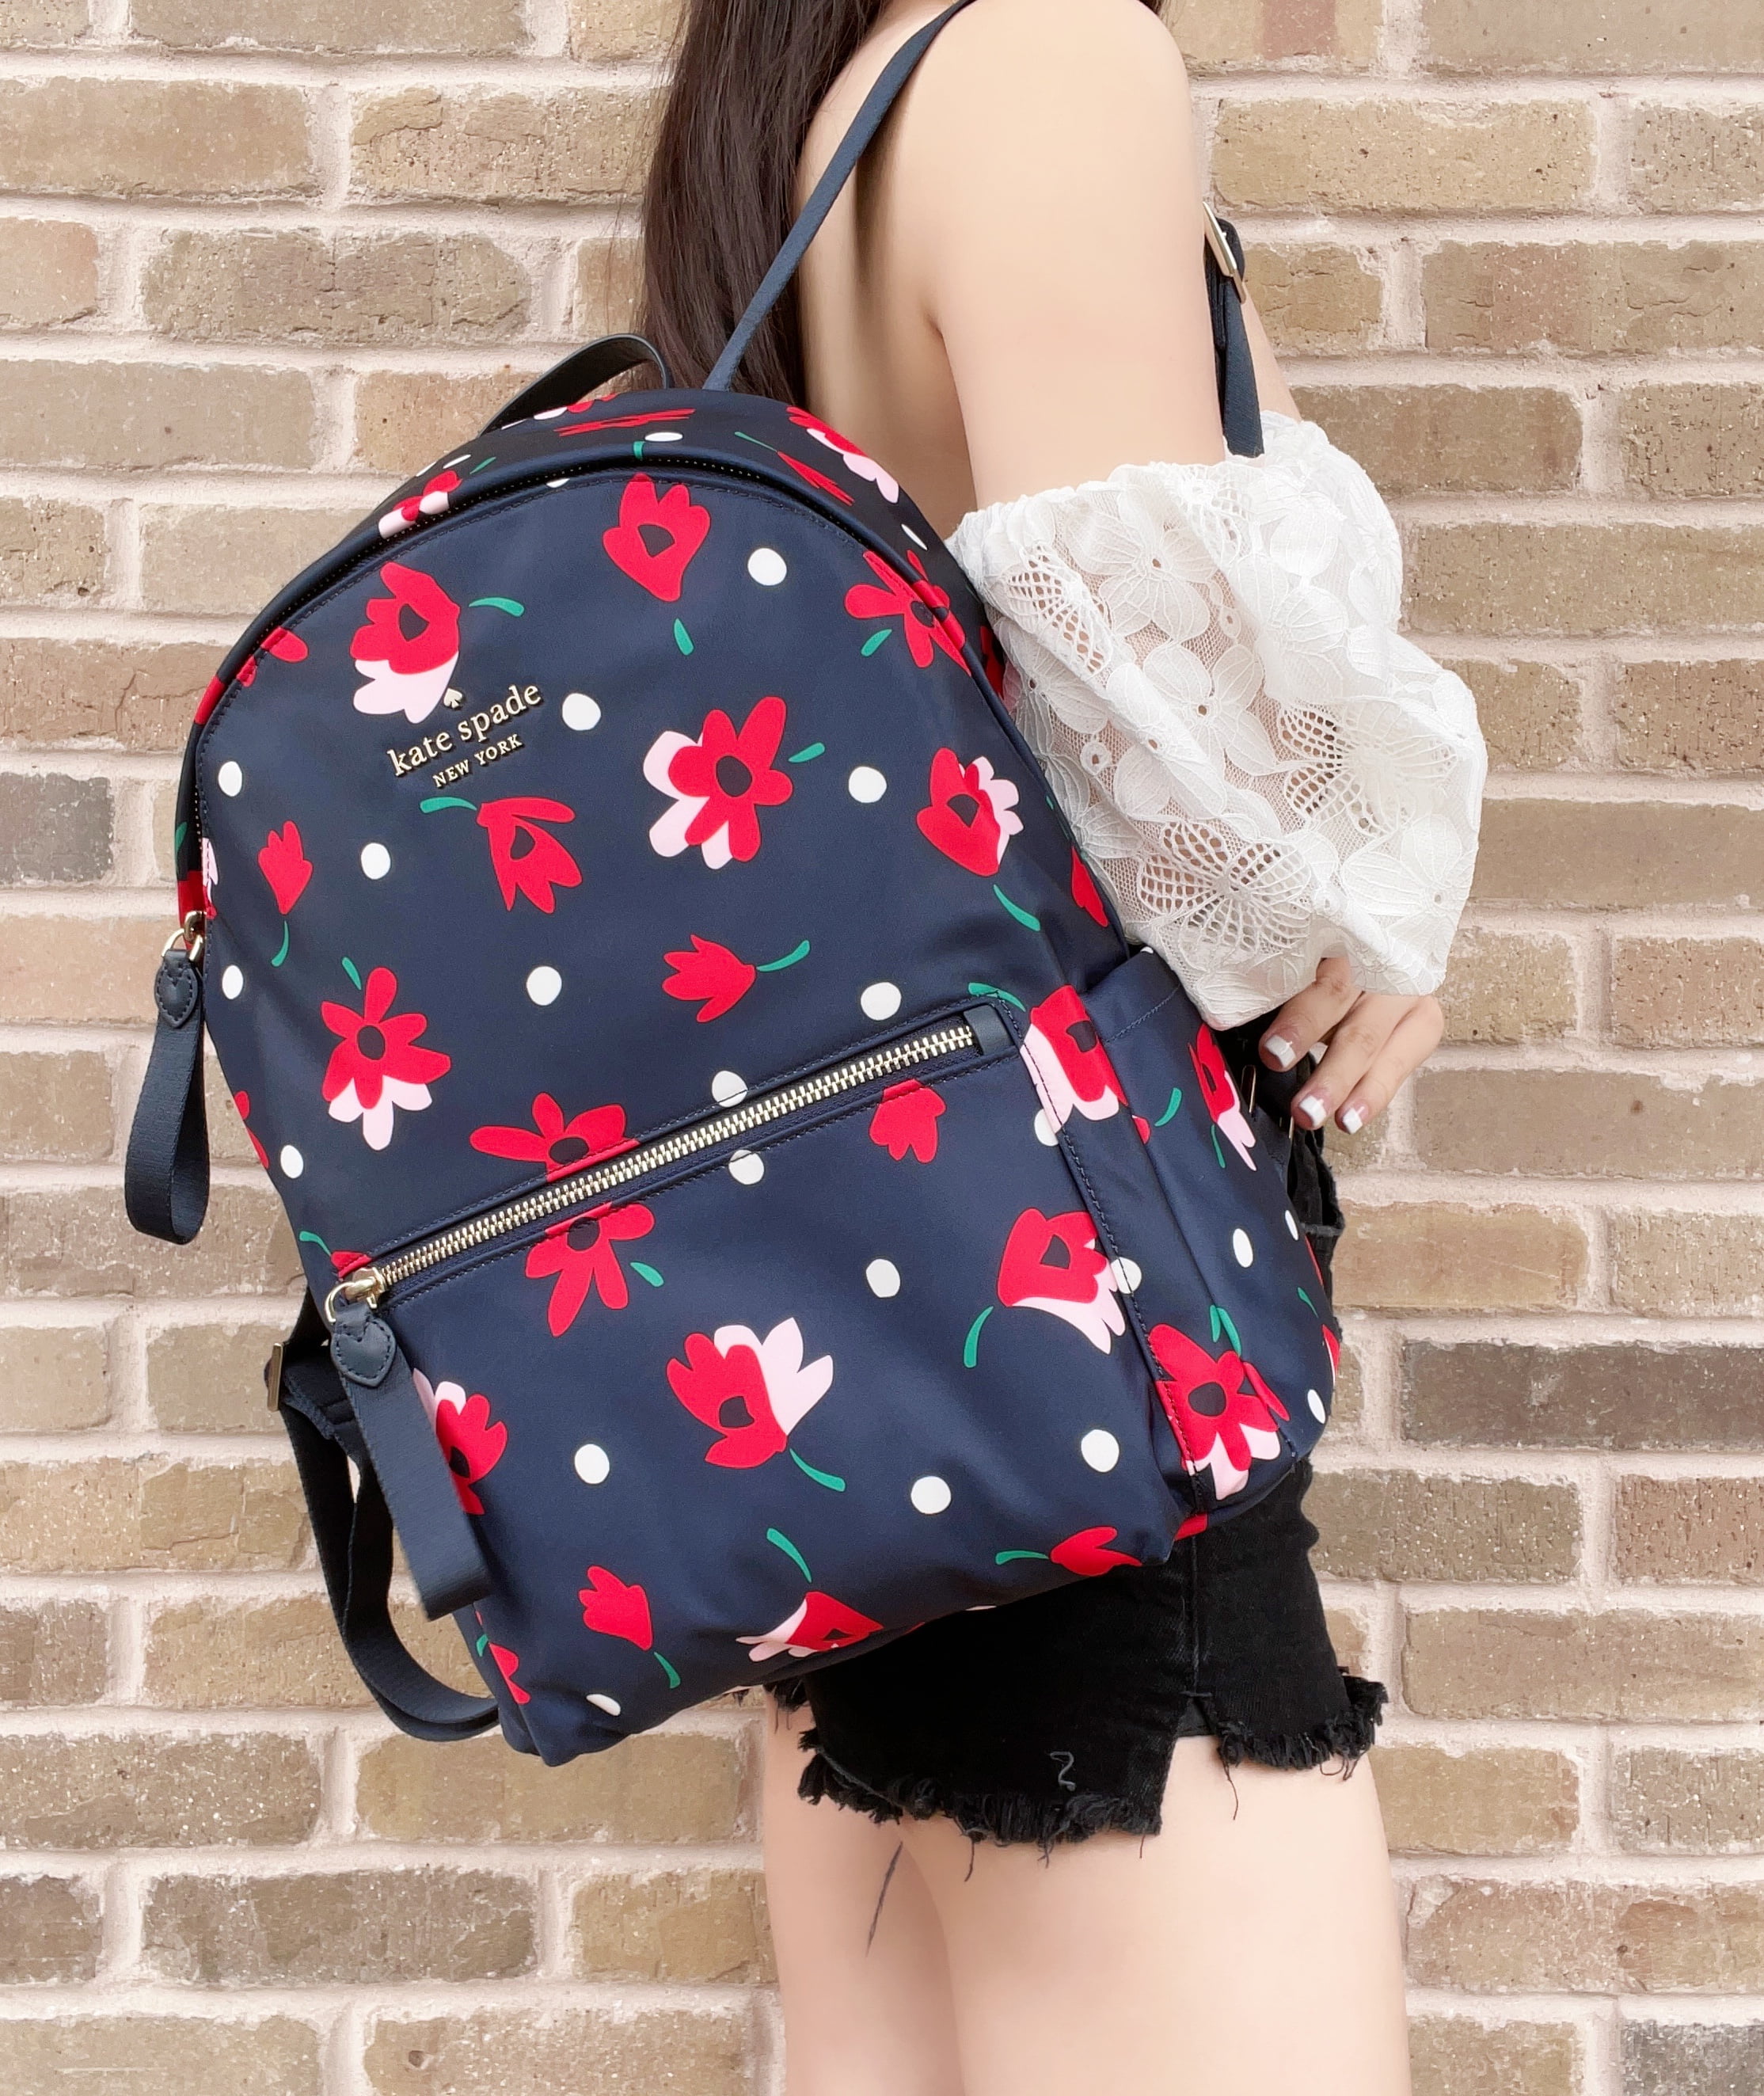 Buy Kate Spade Nylon Chelsea Whimsy Floral Large Backpack Multicolor Blue  Red Online at Lowest Price in Ubuy Zambia. 359886322